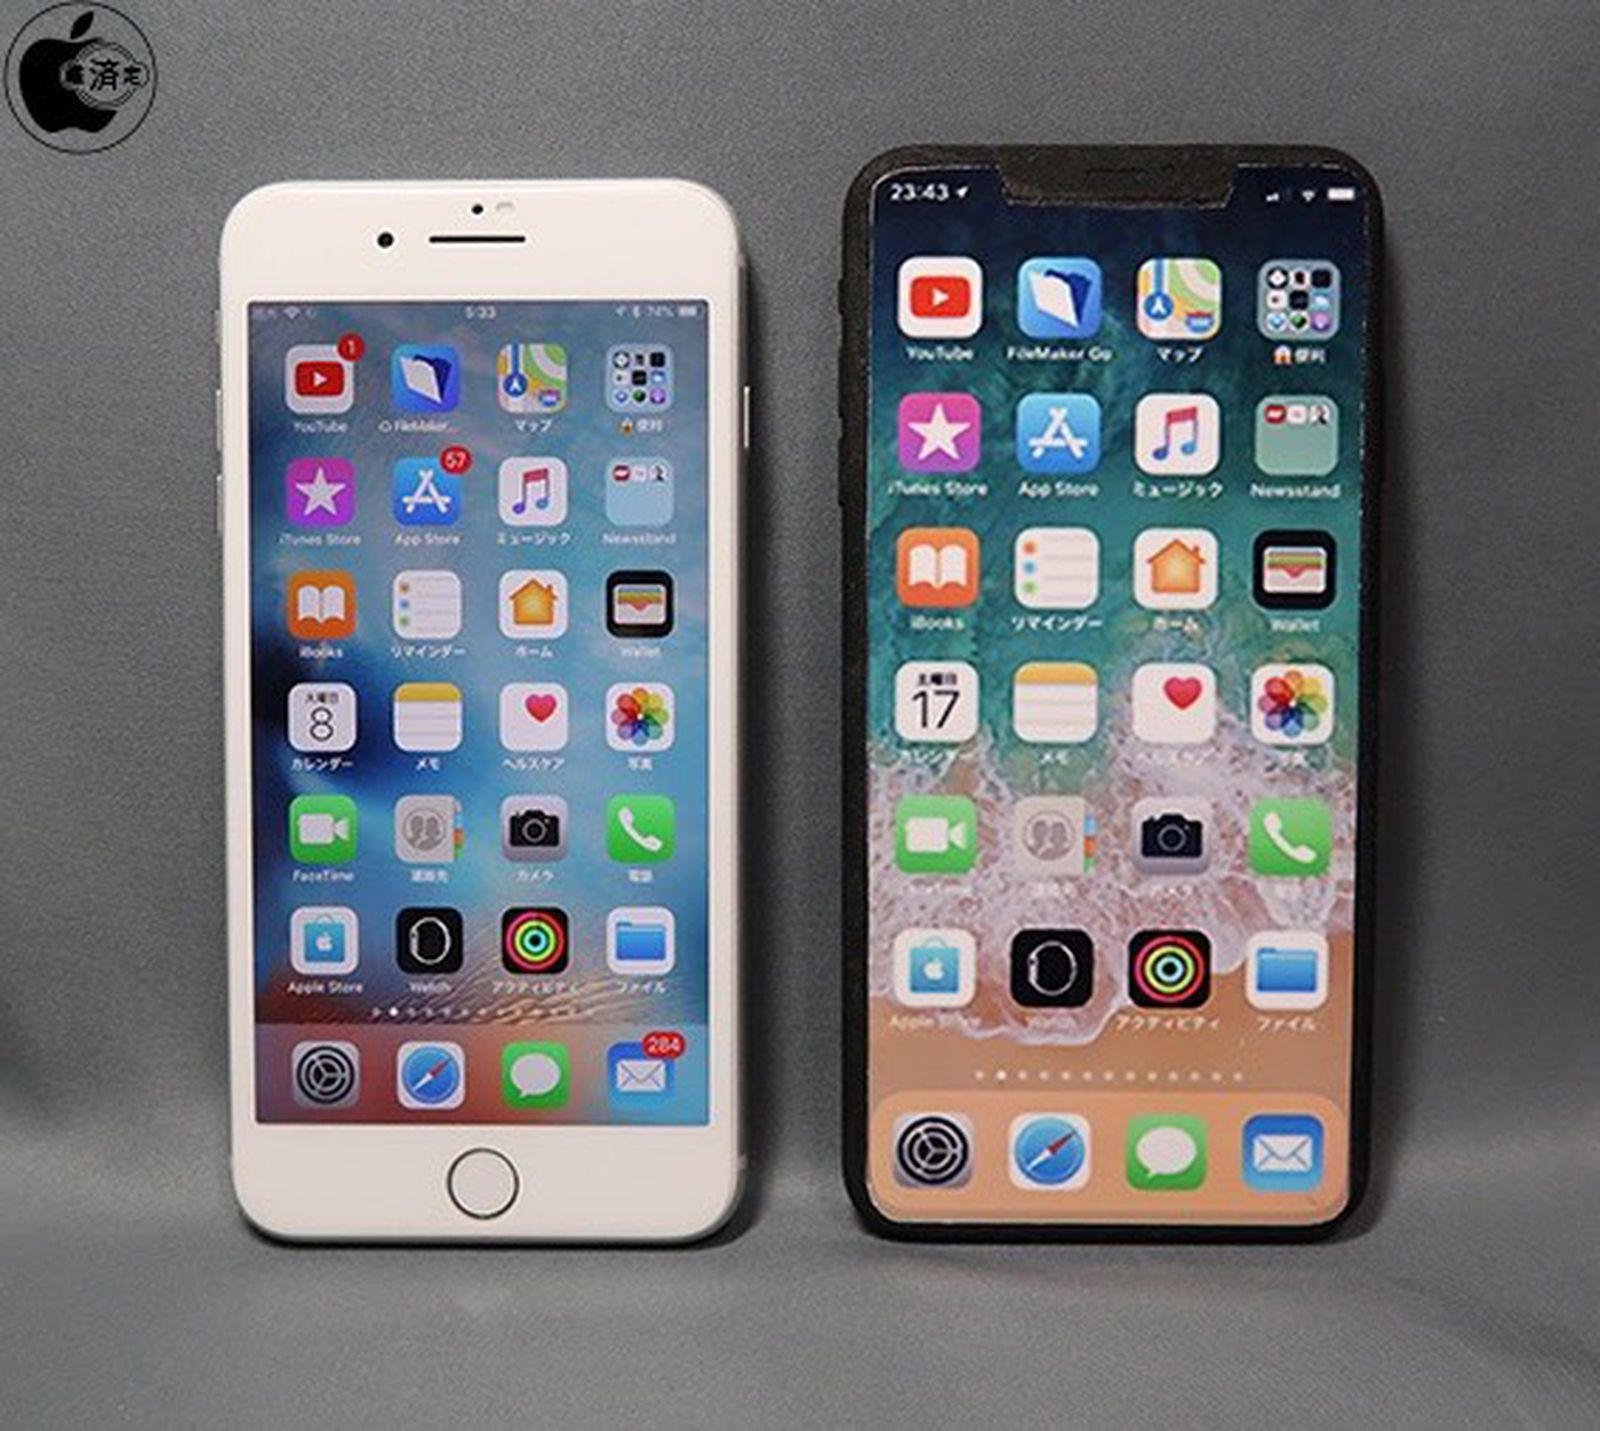 2018 6 5 Inch Iphone To Be Similar In Size To Iphone 8 Plus Ios